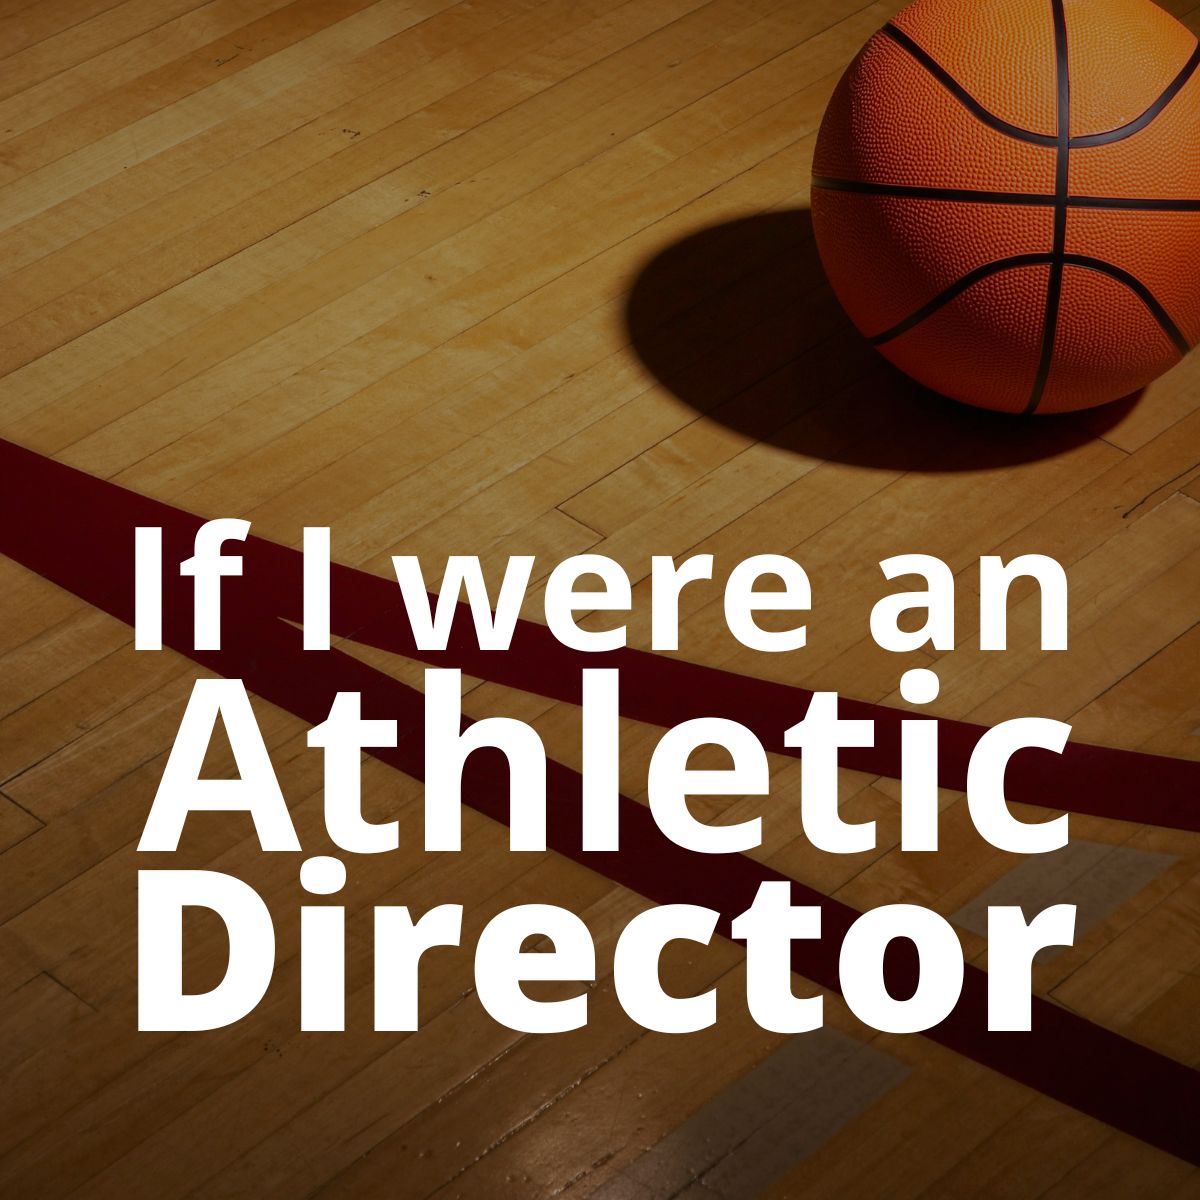 If I were an Athletic Director